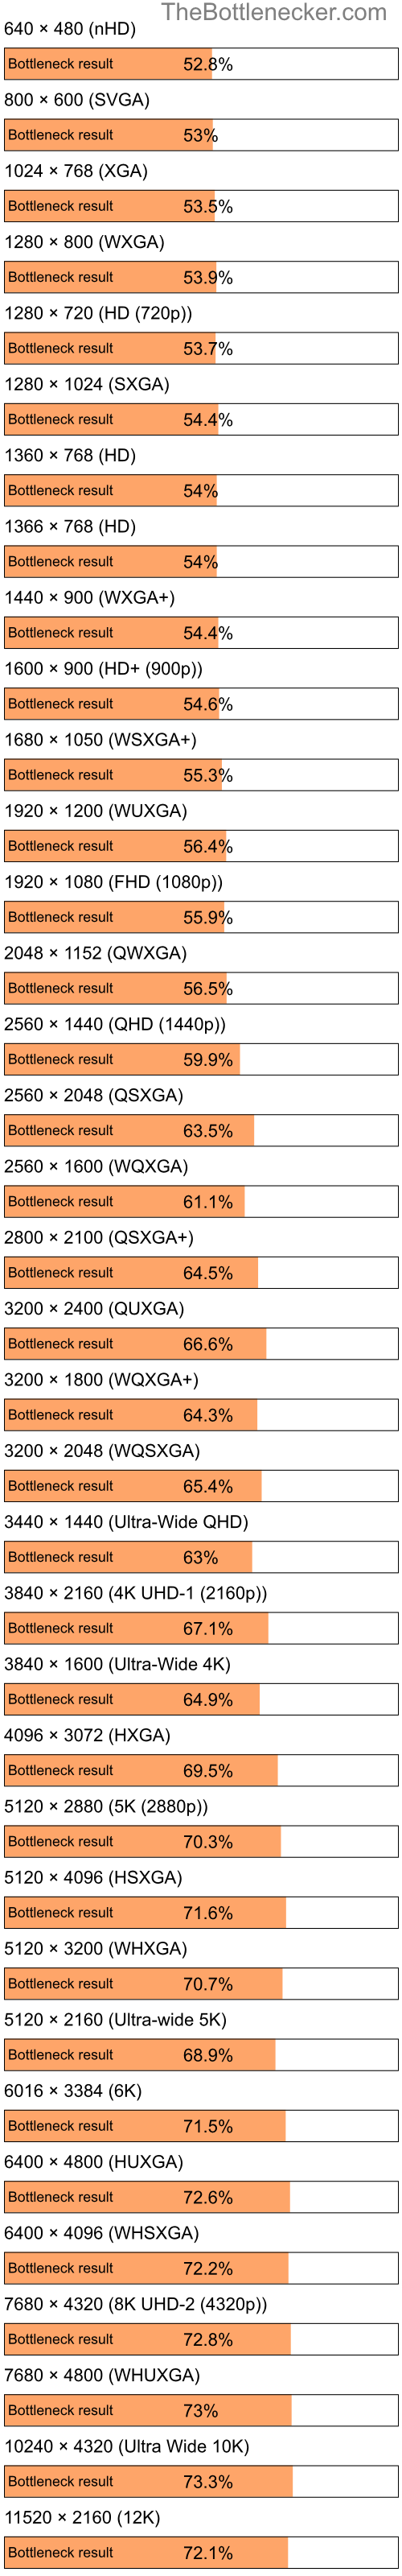 Bottleneck results by resolution for Intel Celeron M 420 and NVIDIA Quadro FX 4400 in Processor Intense Tasks